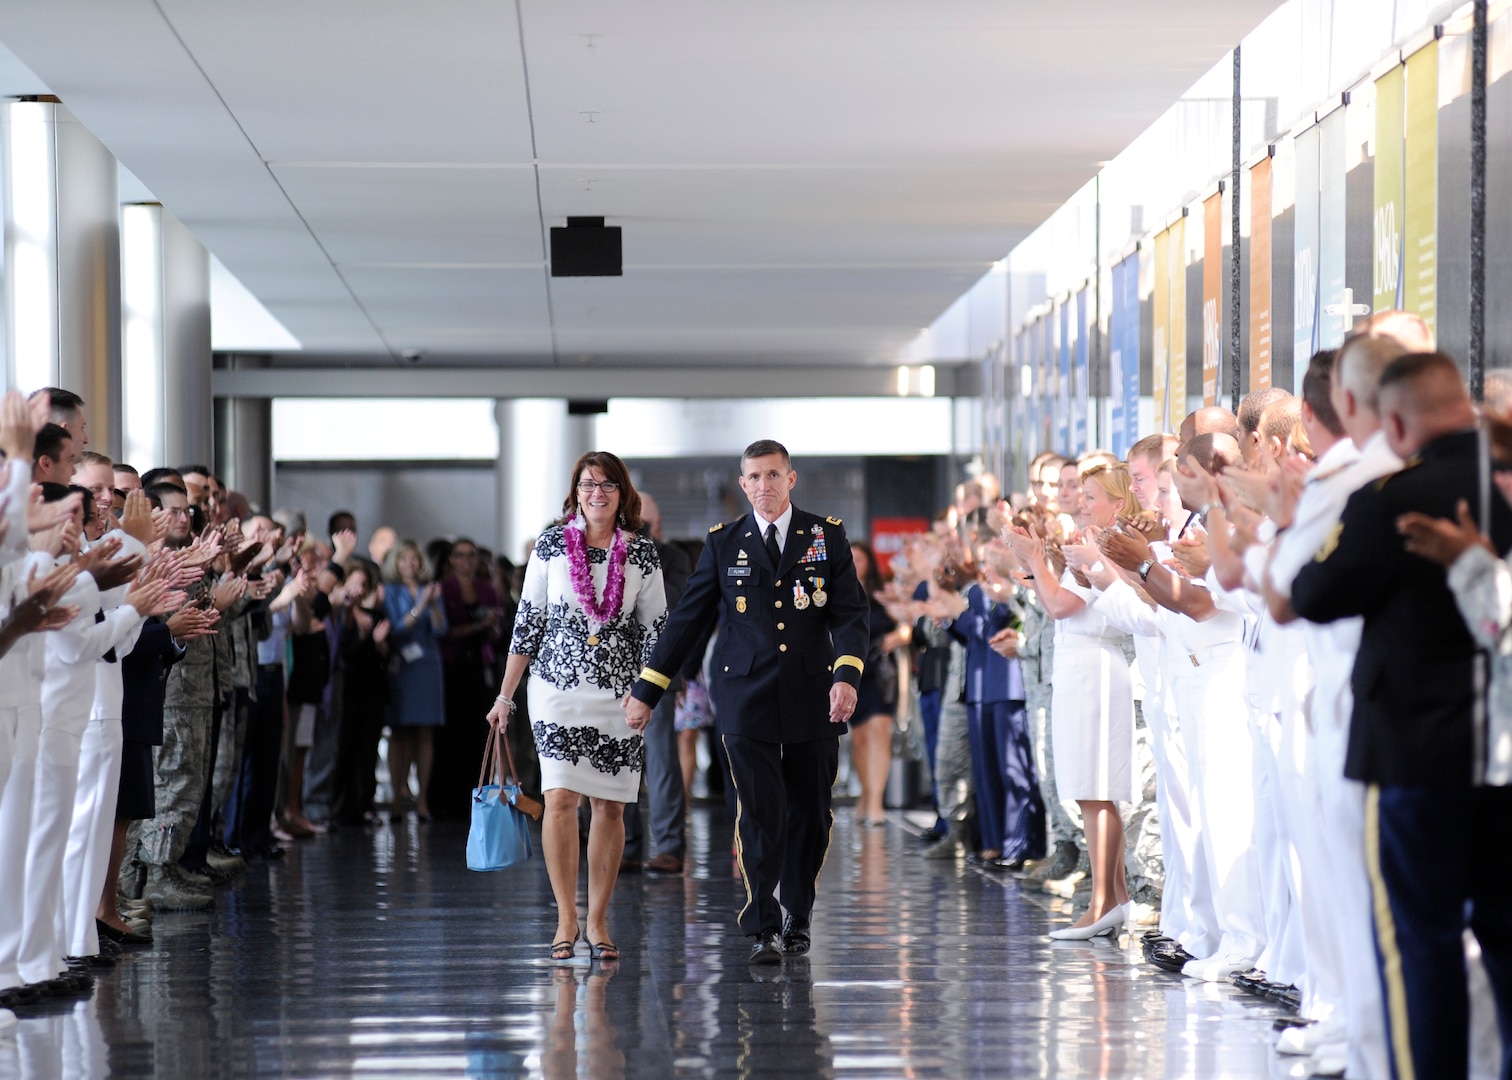 Lt. Gen. Michael Flynn exits DIA Headquarters with his wife, Lori, following his retirement ceremony Aug. 7. Military and civilian members of the workforce lined the hallway to wish the Flynns a fond final farewell.